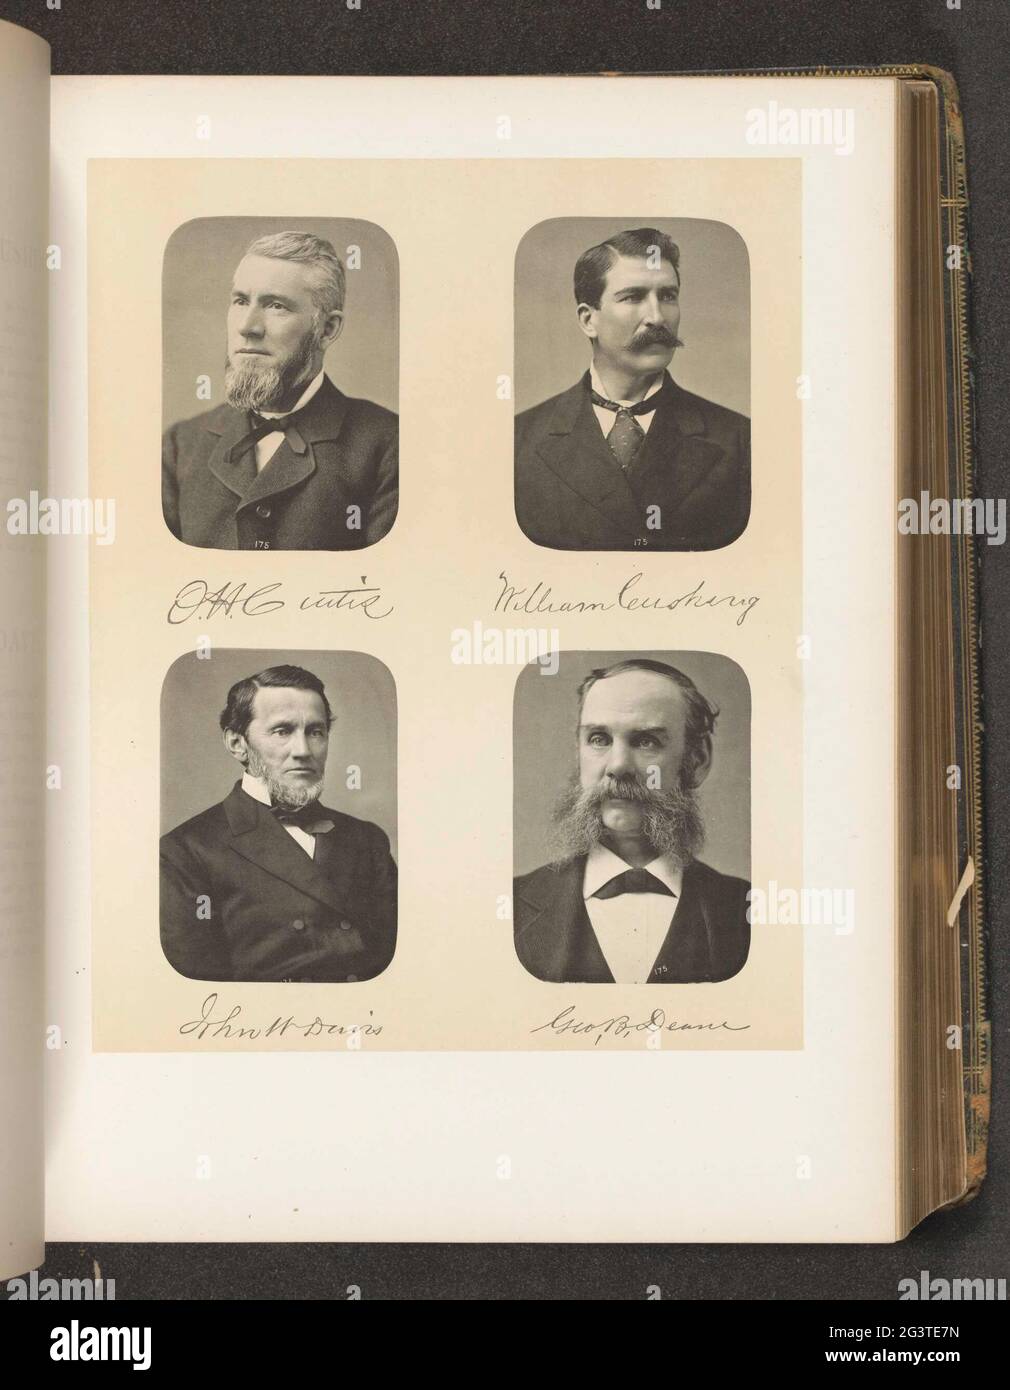 Portraits of four members of the Lower House of the State New York. Top left Oscar H. Curtis, at the top right William Cushing, bottom left John W. Davis, bottom right George B. Deane. Stock Photo